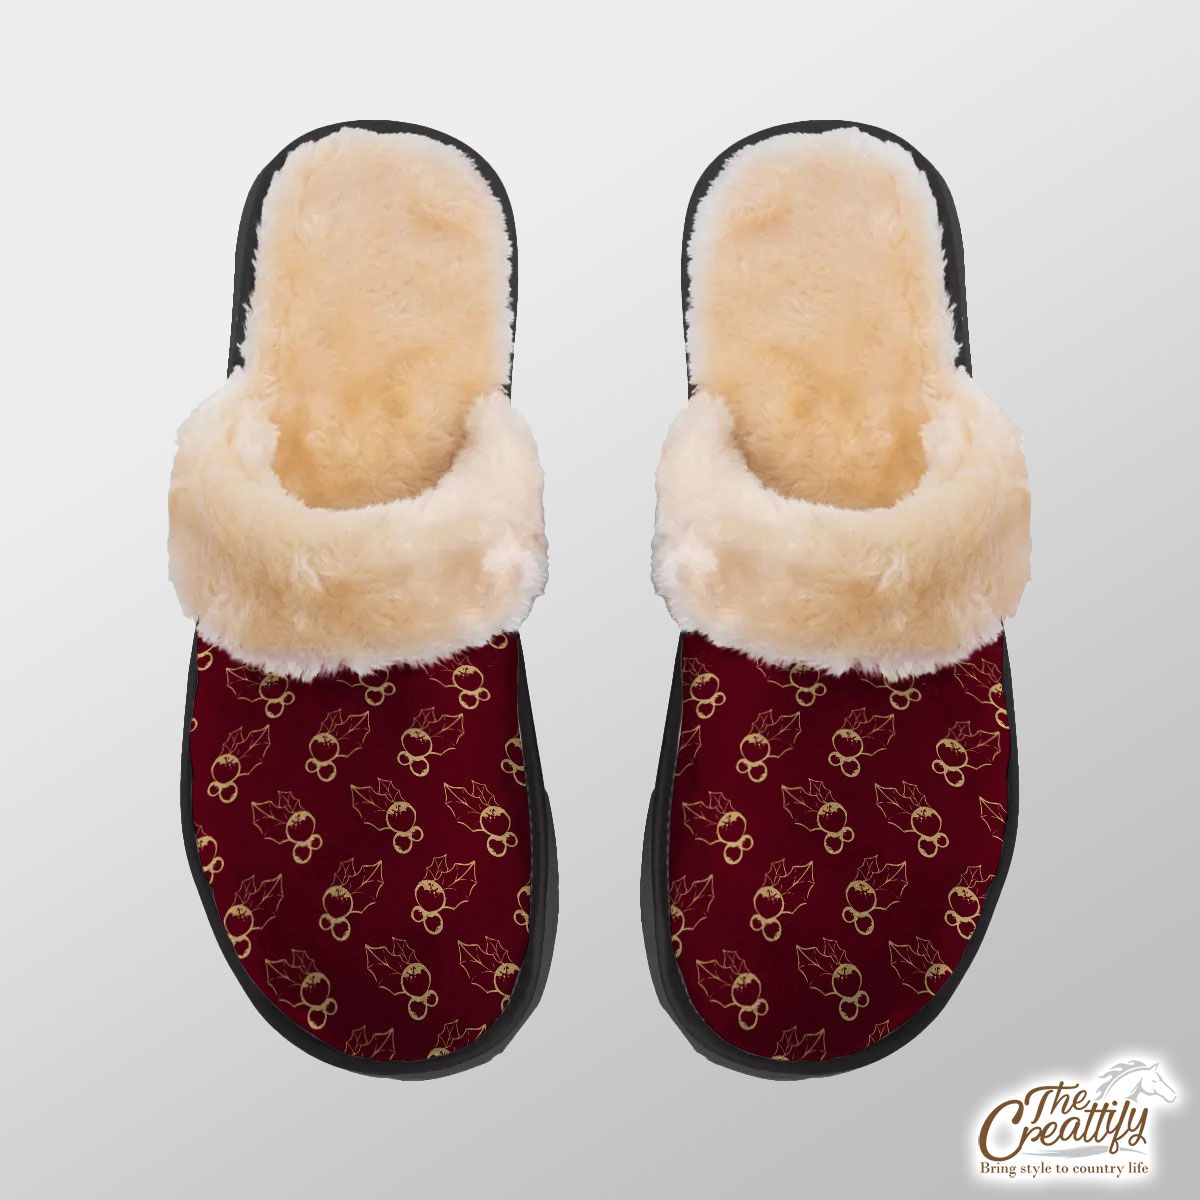 Holly Leaf, Holly Berries, Red Berries Home Plush Slippers